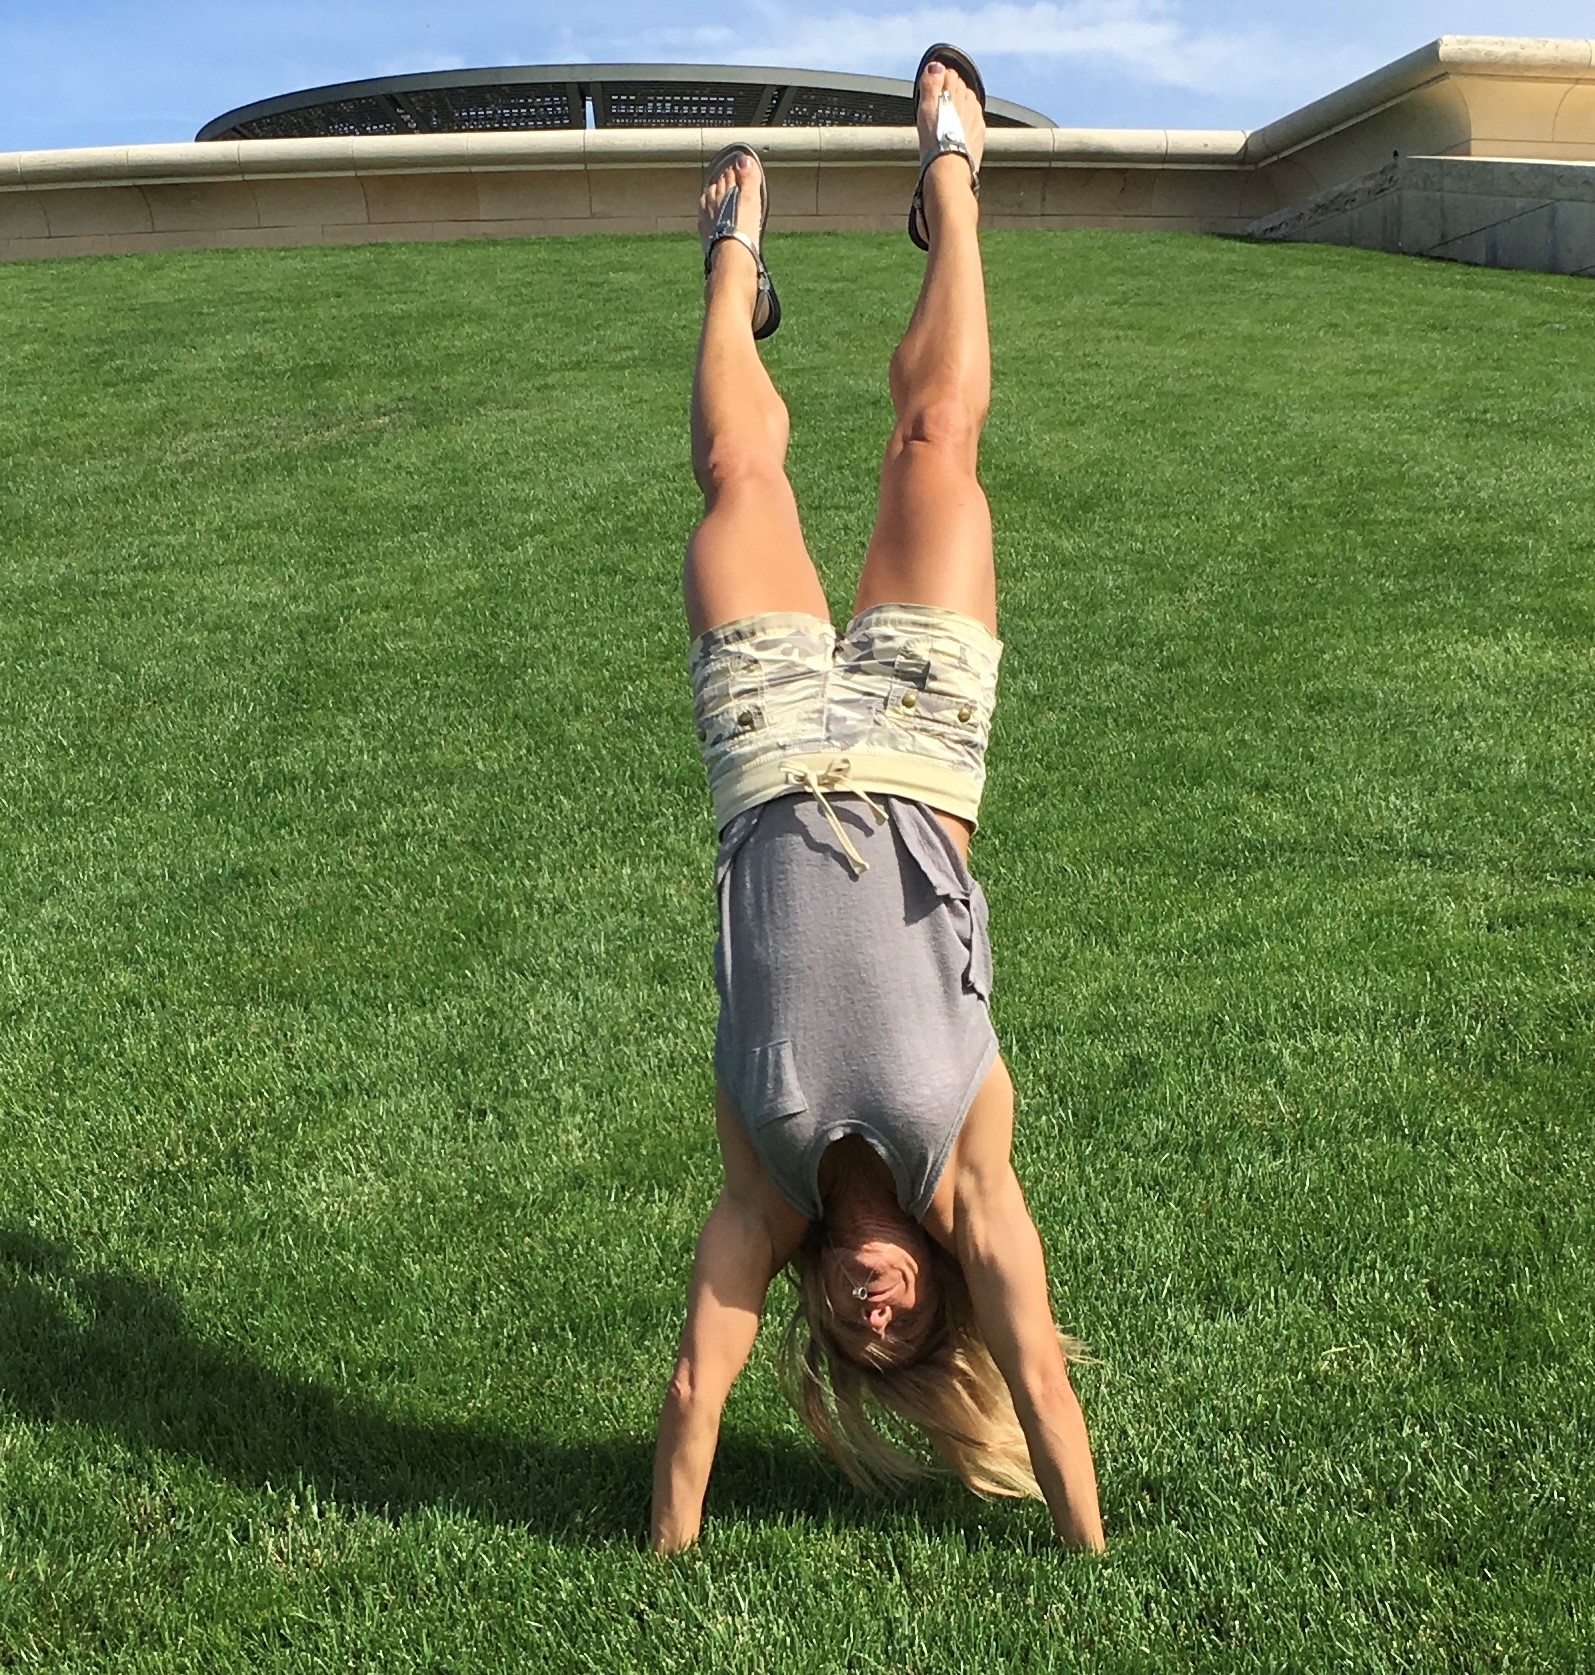 A woman does a handstand on the grass at the bottom of a hill. There’s a building behind a wall at the top of the hill.